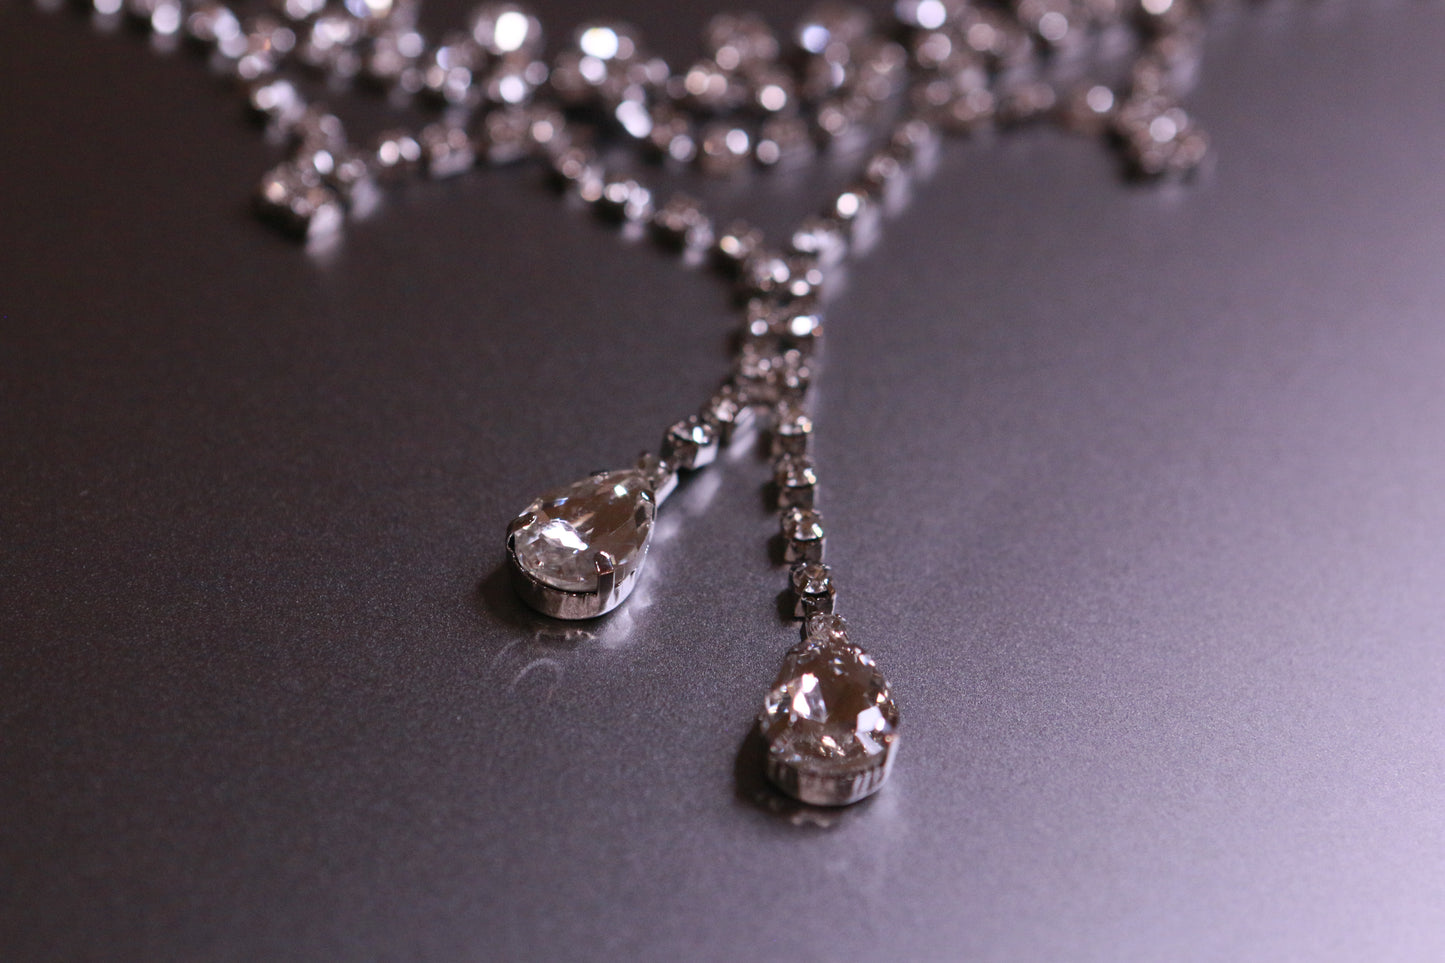 Princess-style Collarbone Chain with Diamond Encrusted